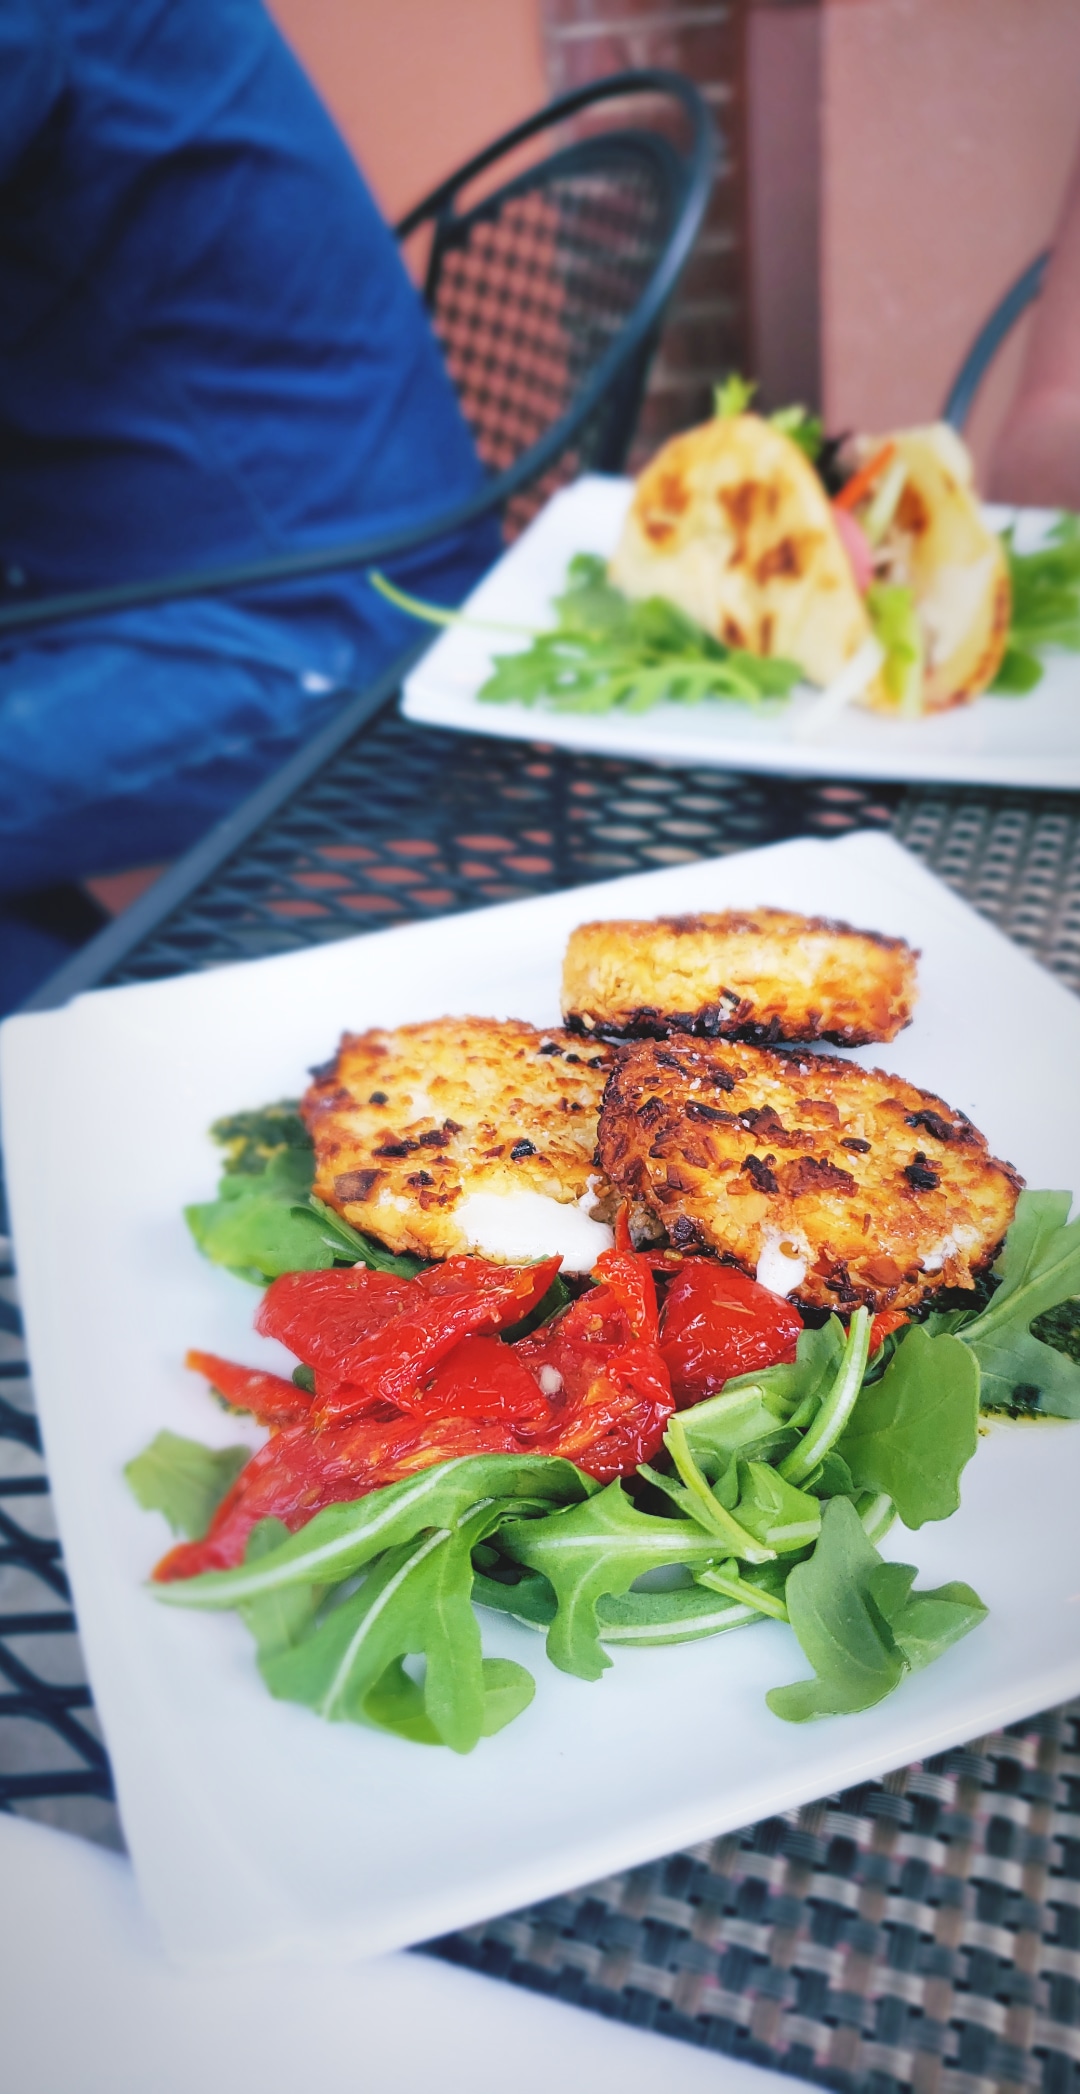 House-made mozzarella is coated with almonds then pan-fried until melty and delicious. Topped with roasted tomato, arugula and basil pesto - Luca's - Keene, NH